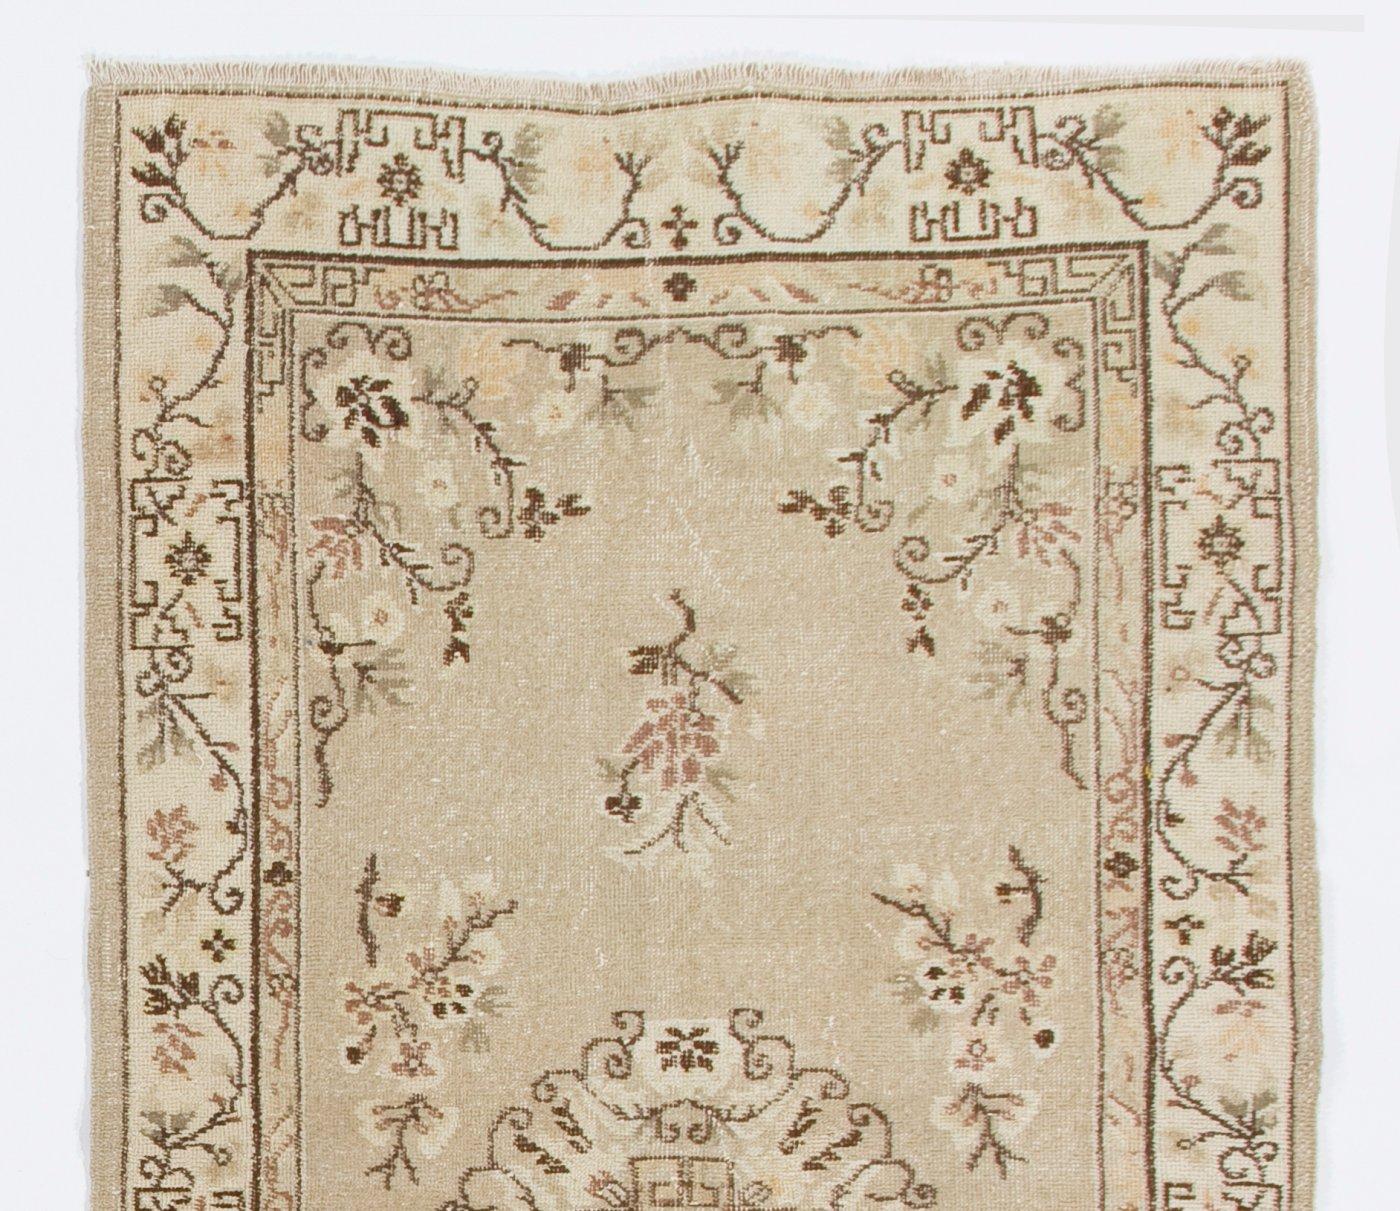 A finely hand-knotted vintage Turkish carpet from the 1960s featuring an Art Deco Chinese design of a central medallion made up of floral motifs and scrolling vines as well as realistic looking floating floral vines in brown, ivory and pale moss